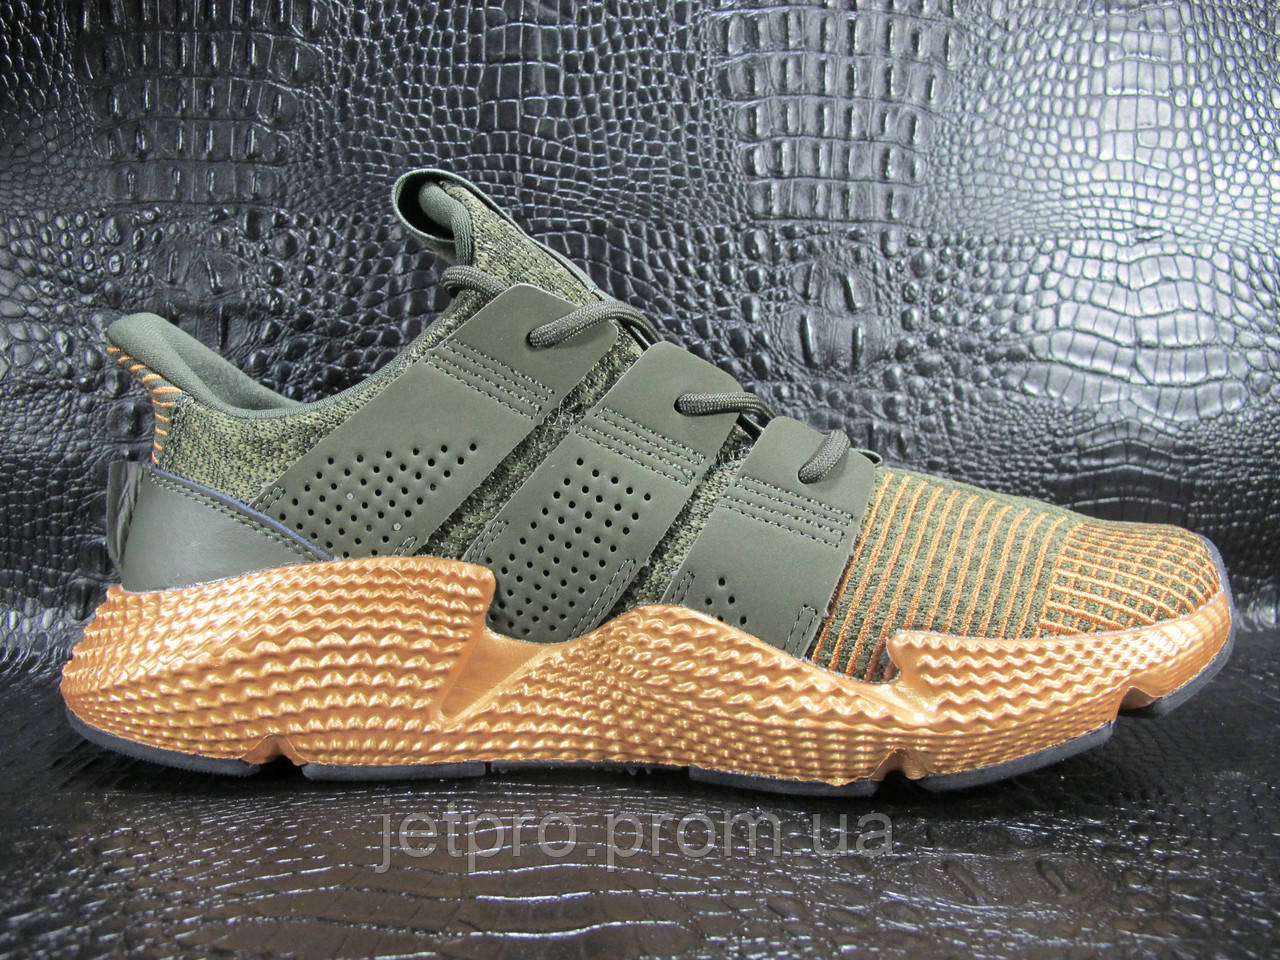 adidas prophere green gold